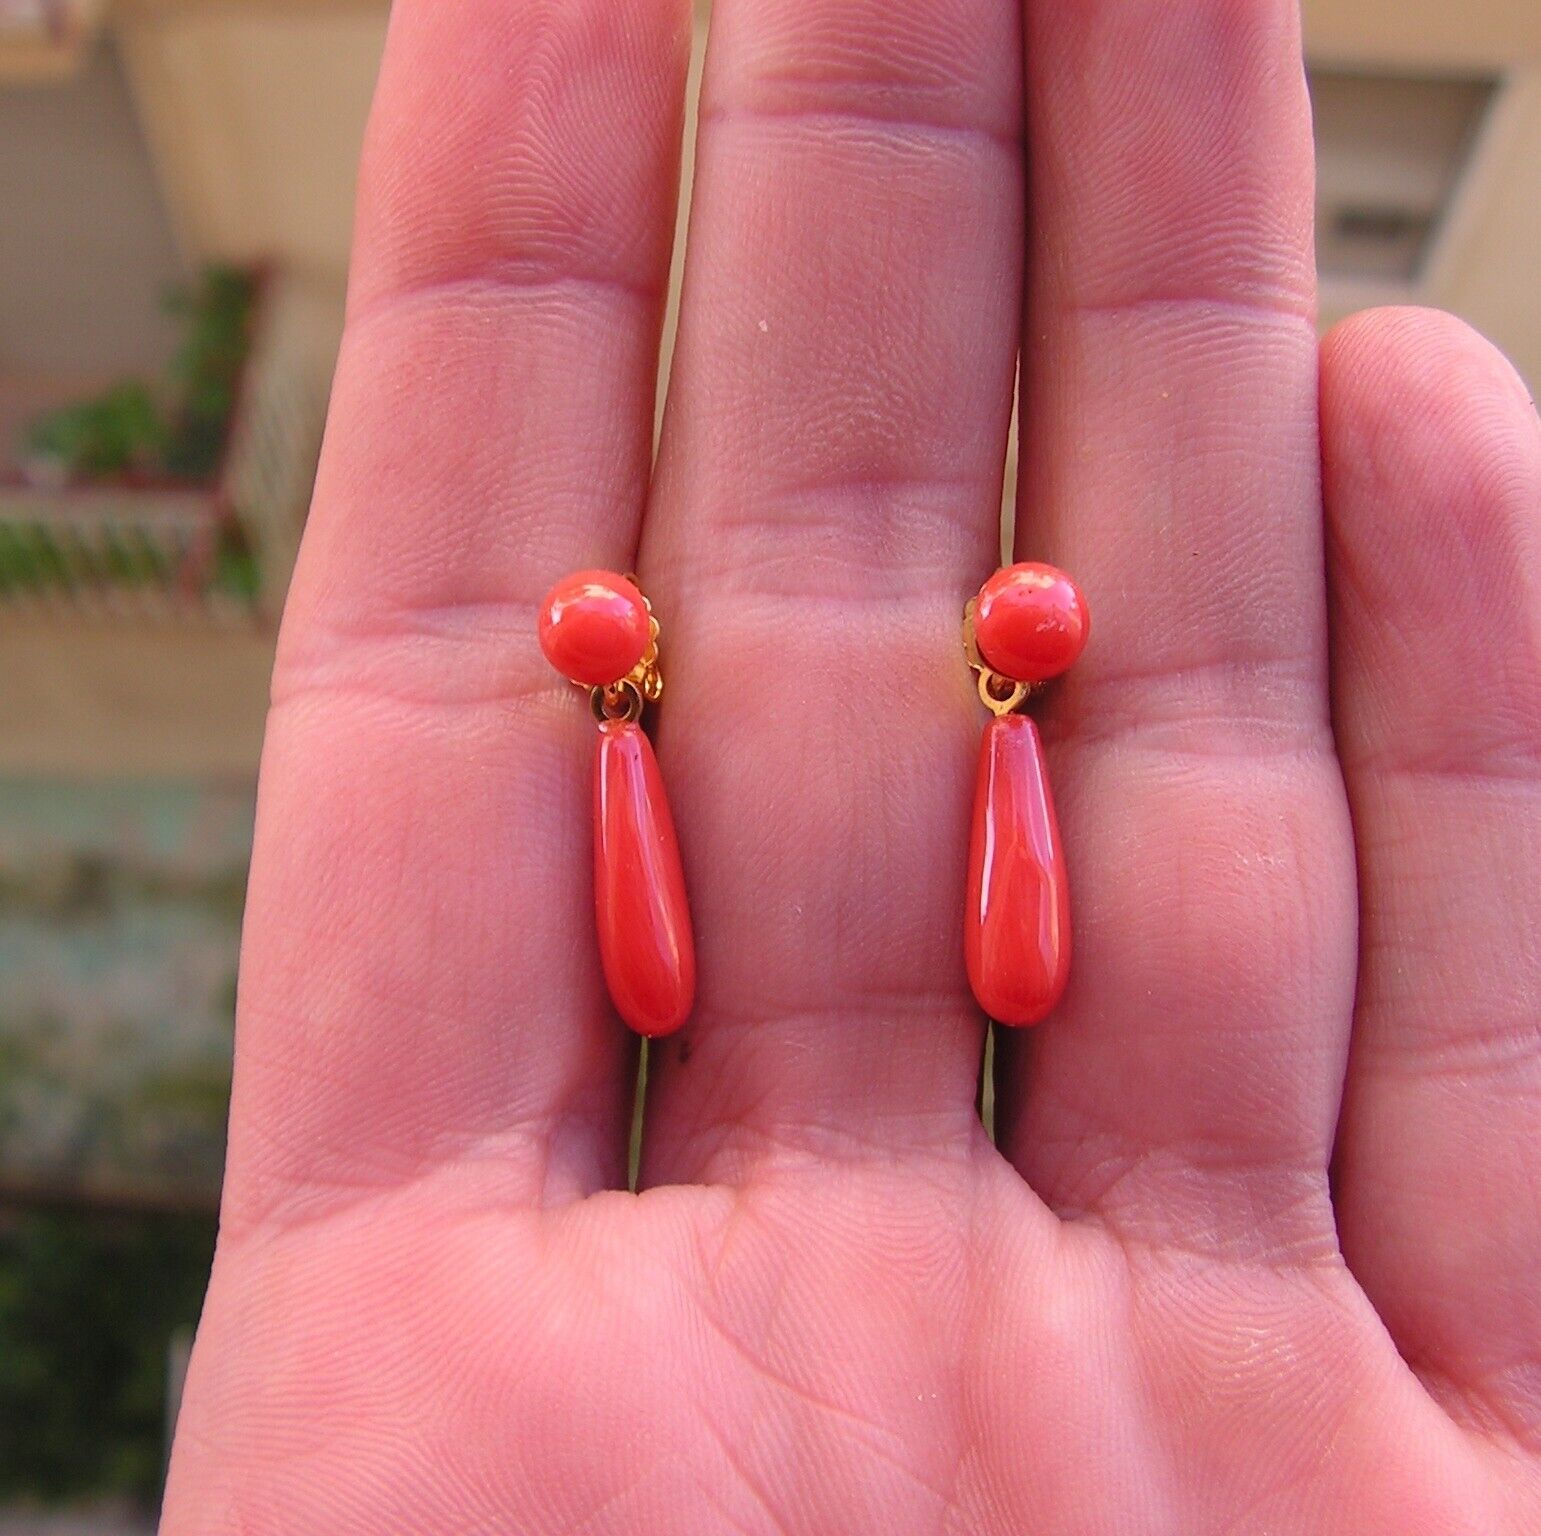 ANTIQUE VICTORIAN FRENCH SILVER GOLD  RED CORAL 8mm  1 FINE EARRINGS HEART  DROP